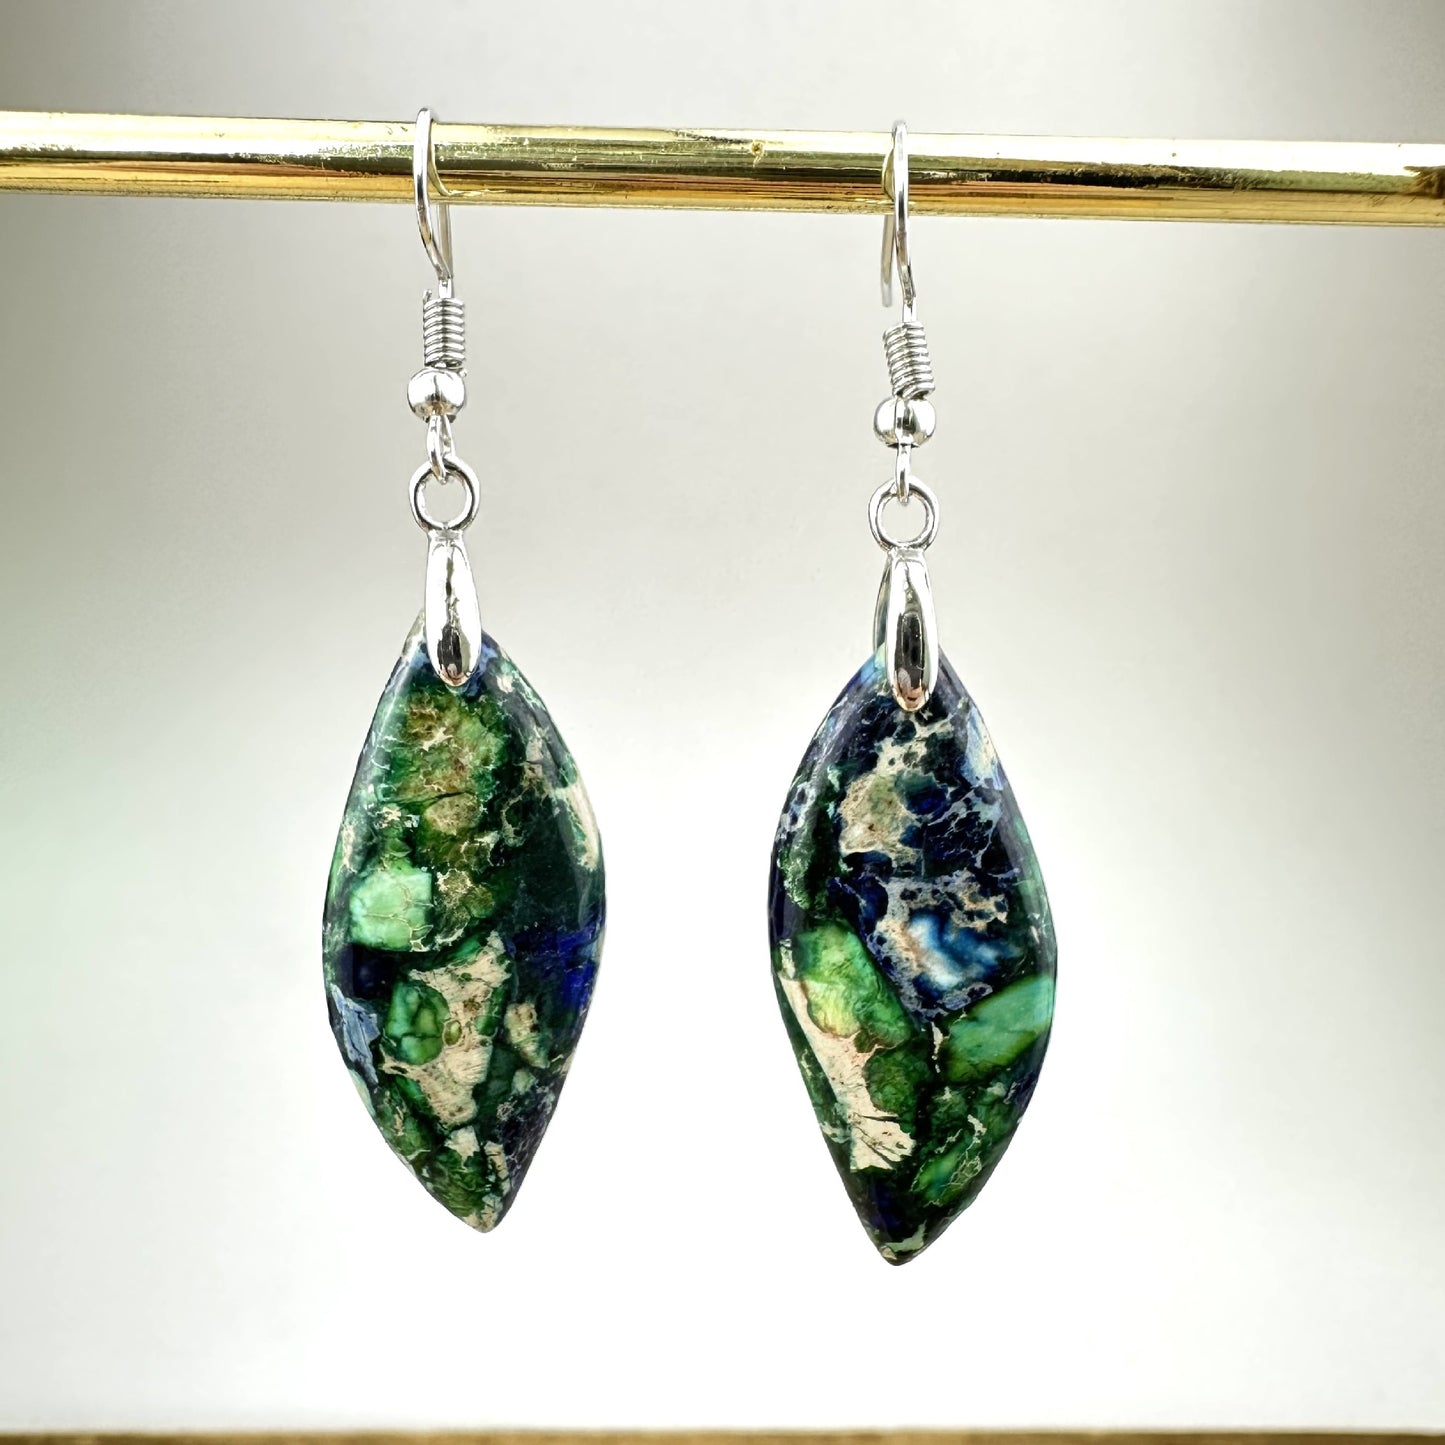 Colorful Imperial Jasper Leaf-shaped Earrings with Seed Bead Clasp